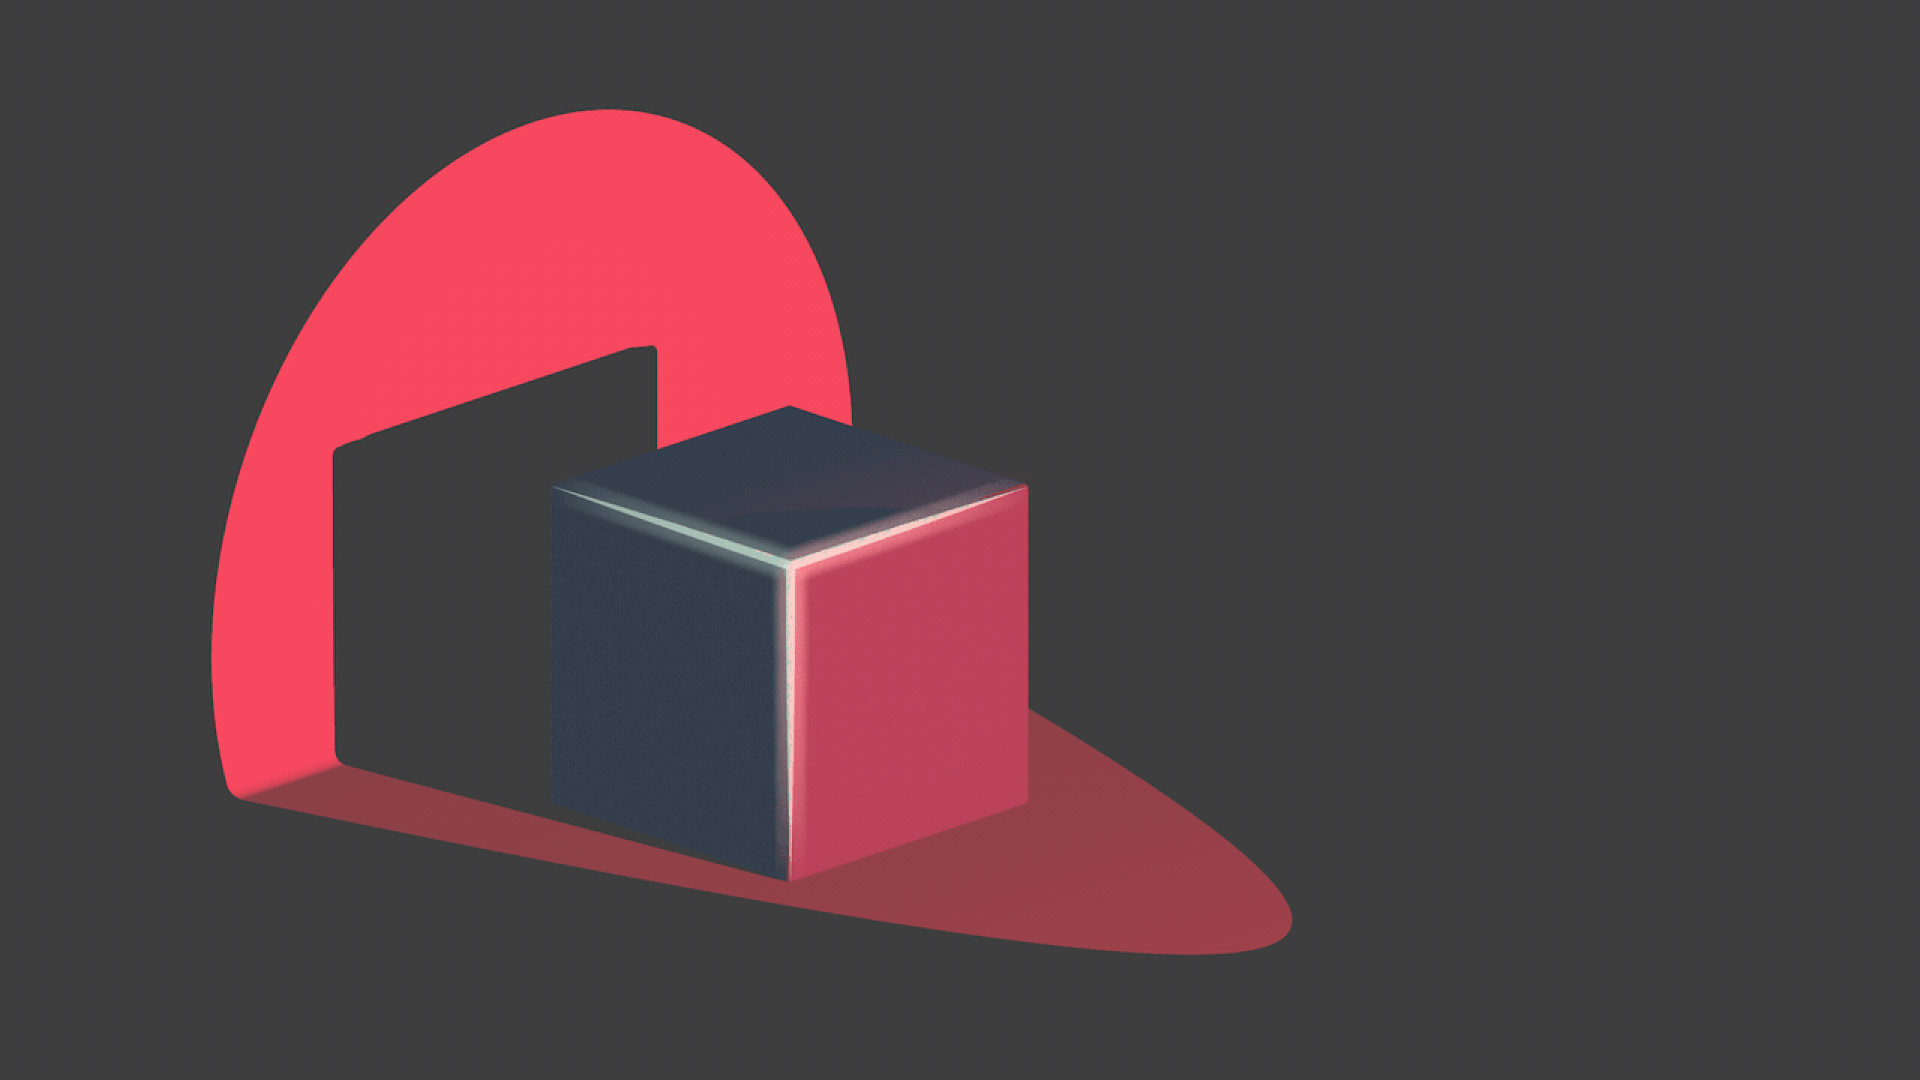 Illustration of a crypto block sitting in the dark, with a red and blue light rotating over it.